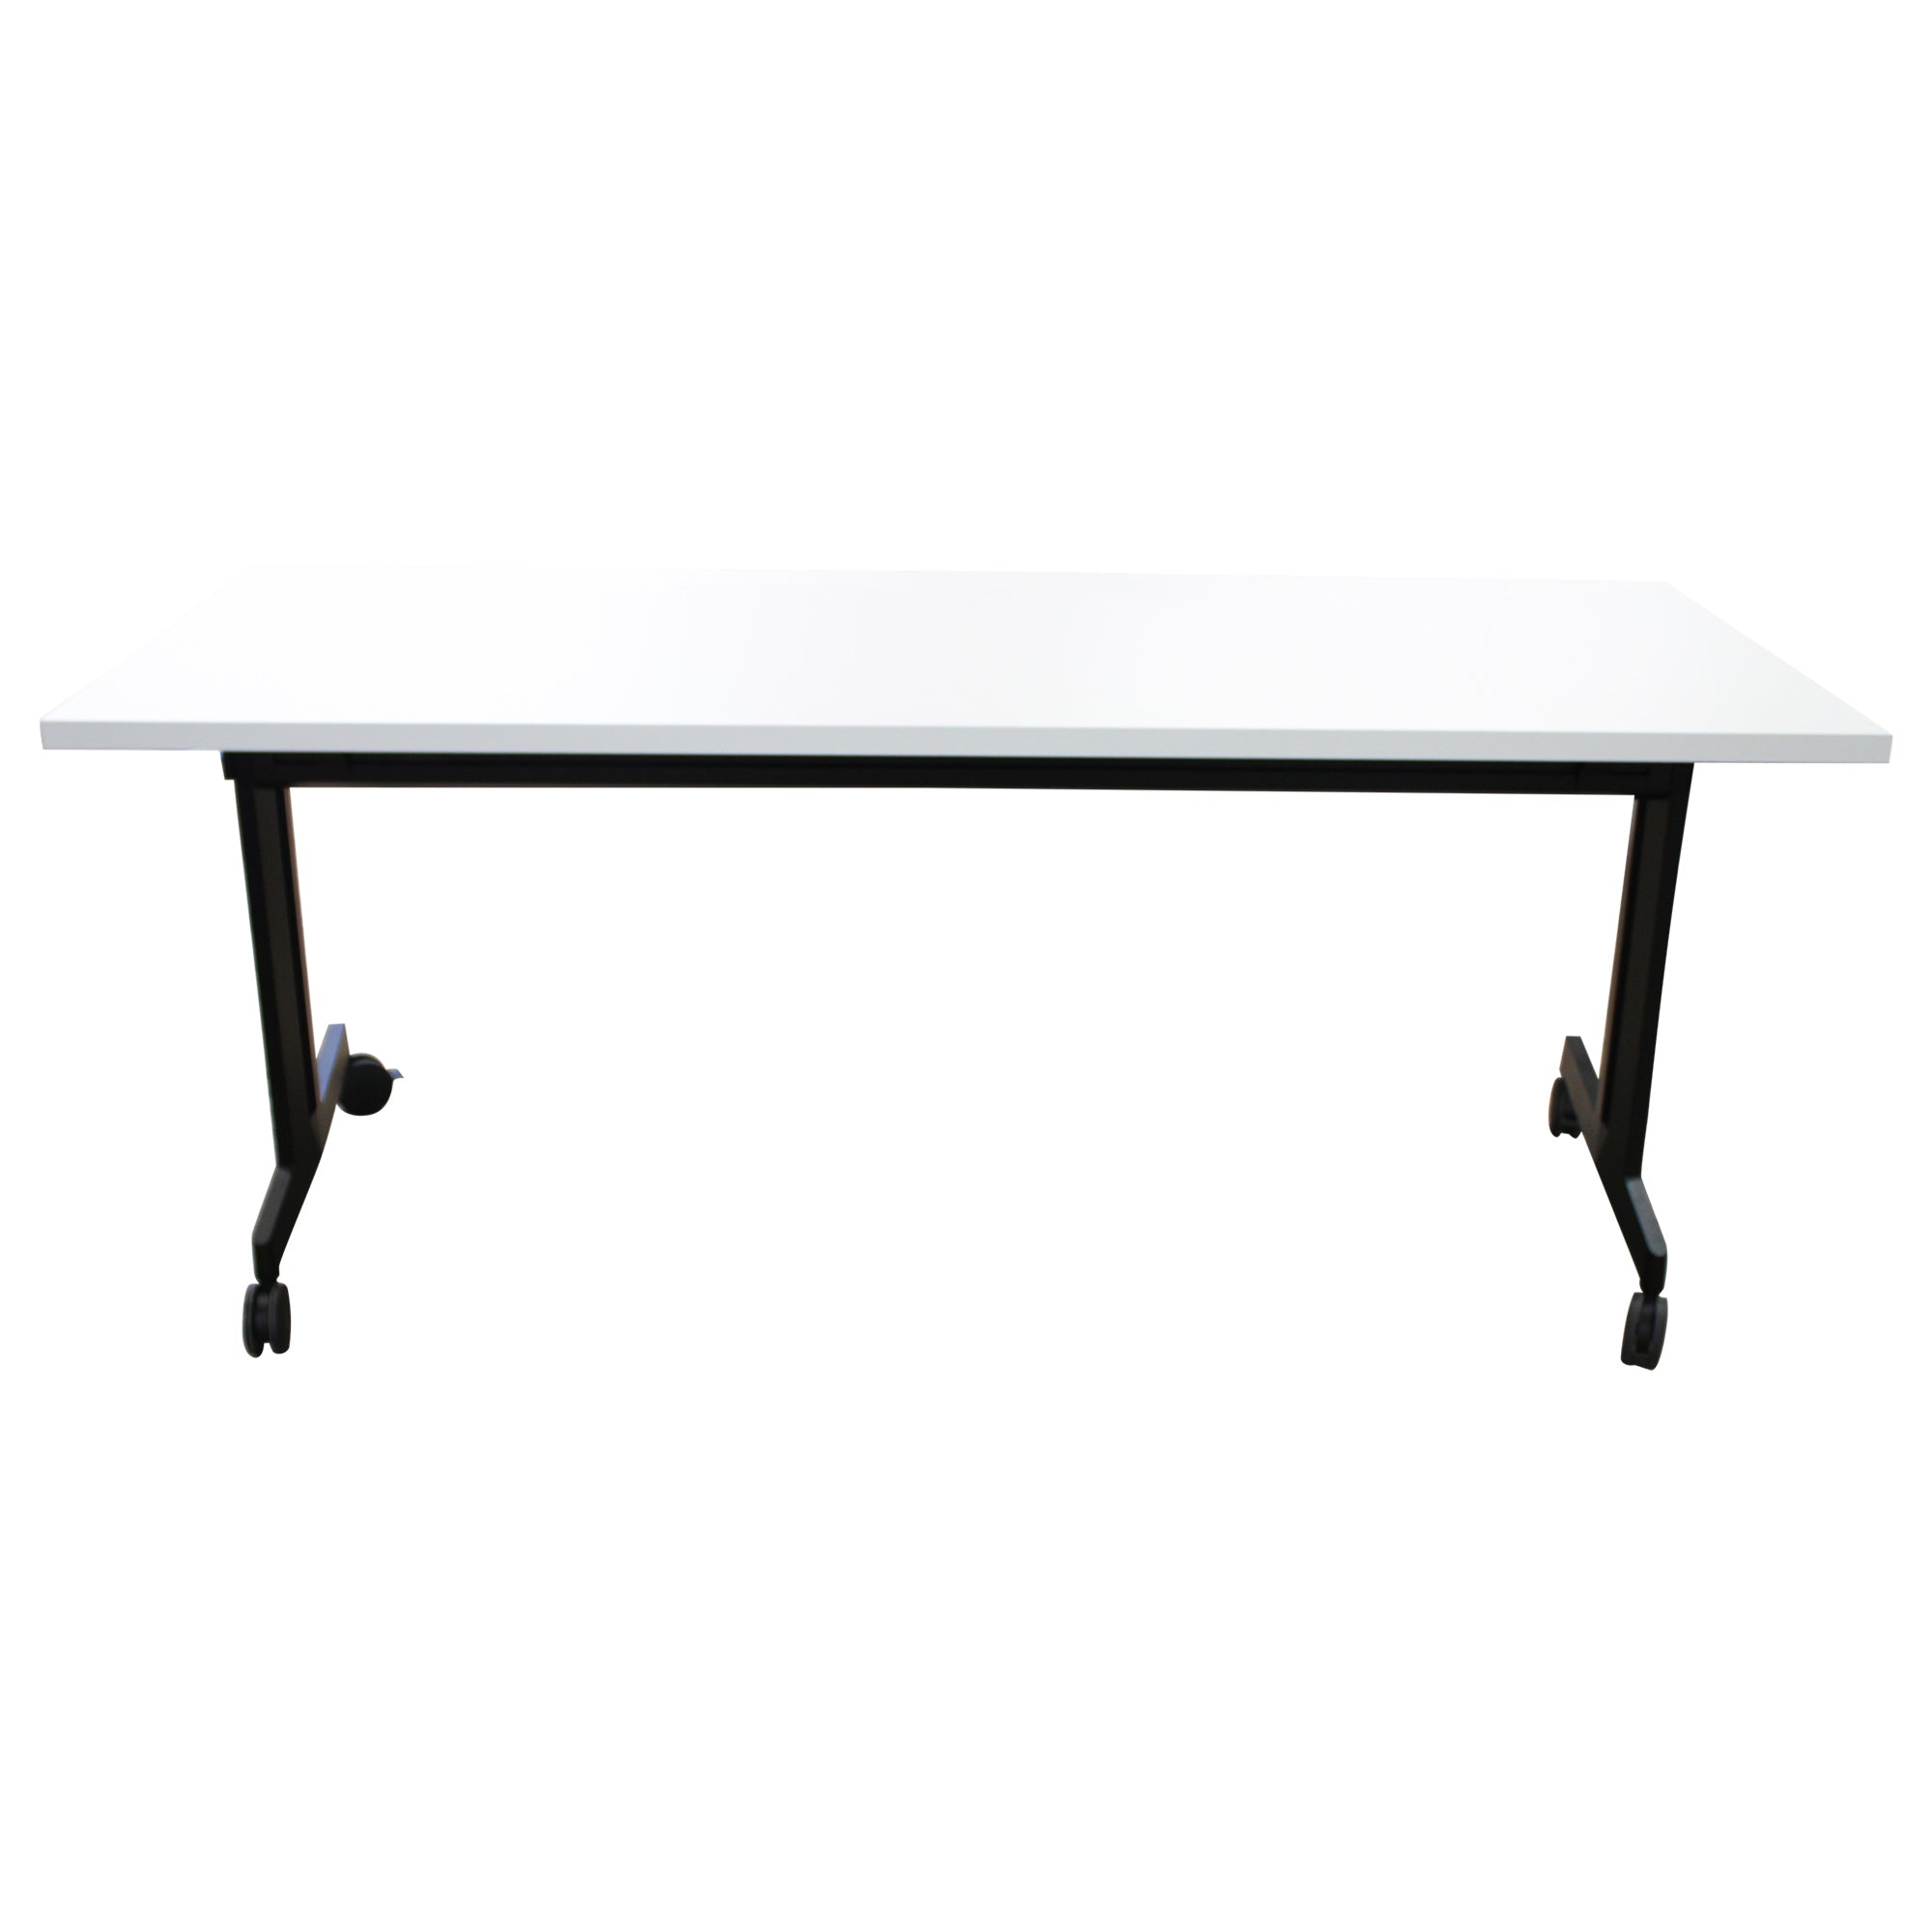 Haworth Planes Training Table - Preowned